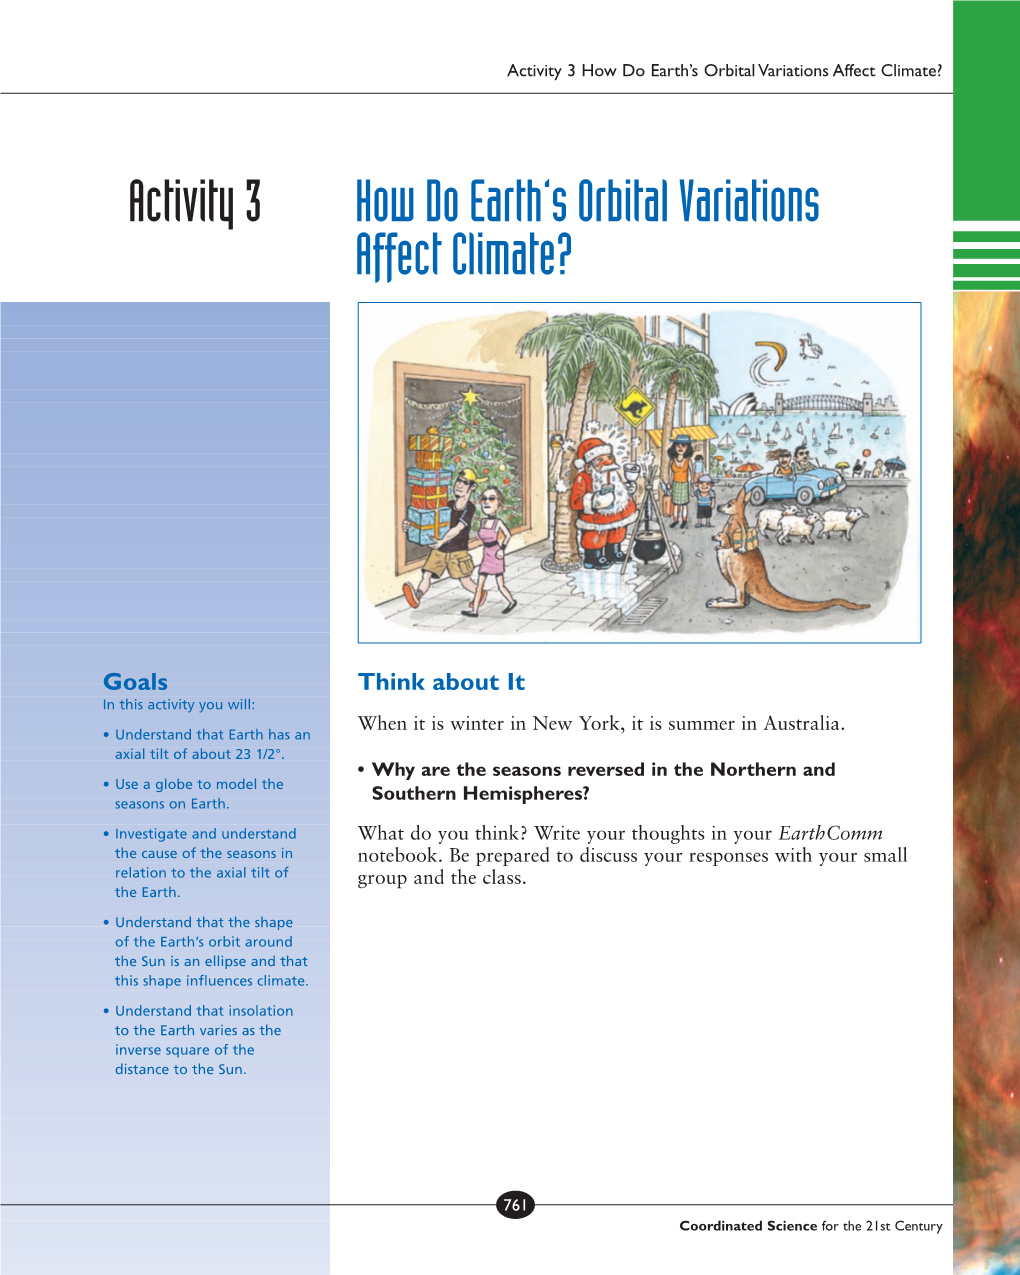 Activity 3 How Do Earth's Orbital Variations Affect Climate?